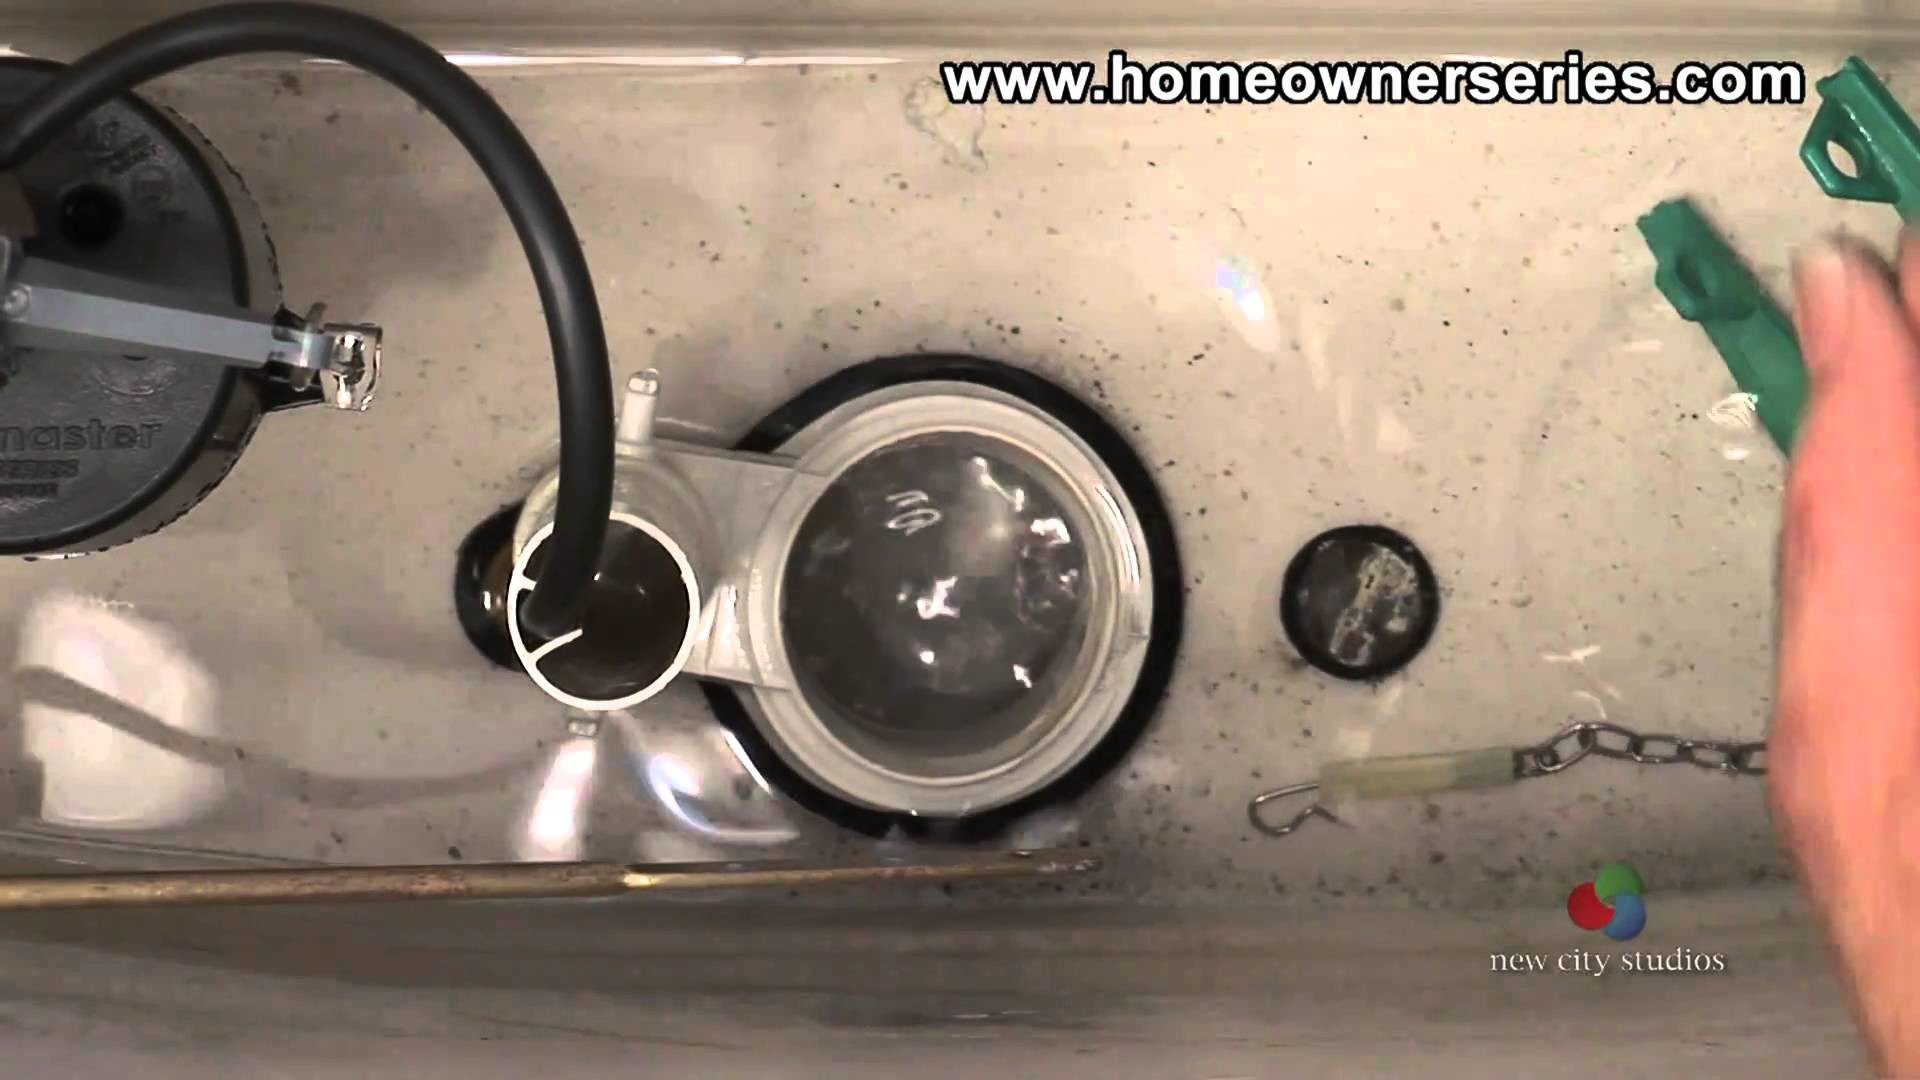 How to Fix a Toilet - Flapper Valve Replacement